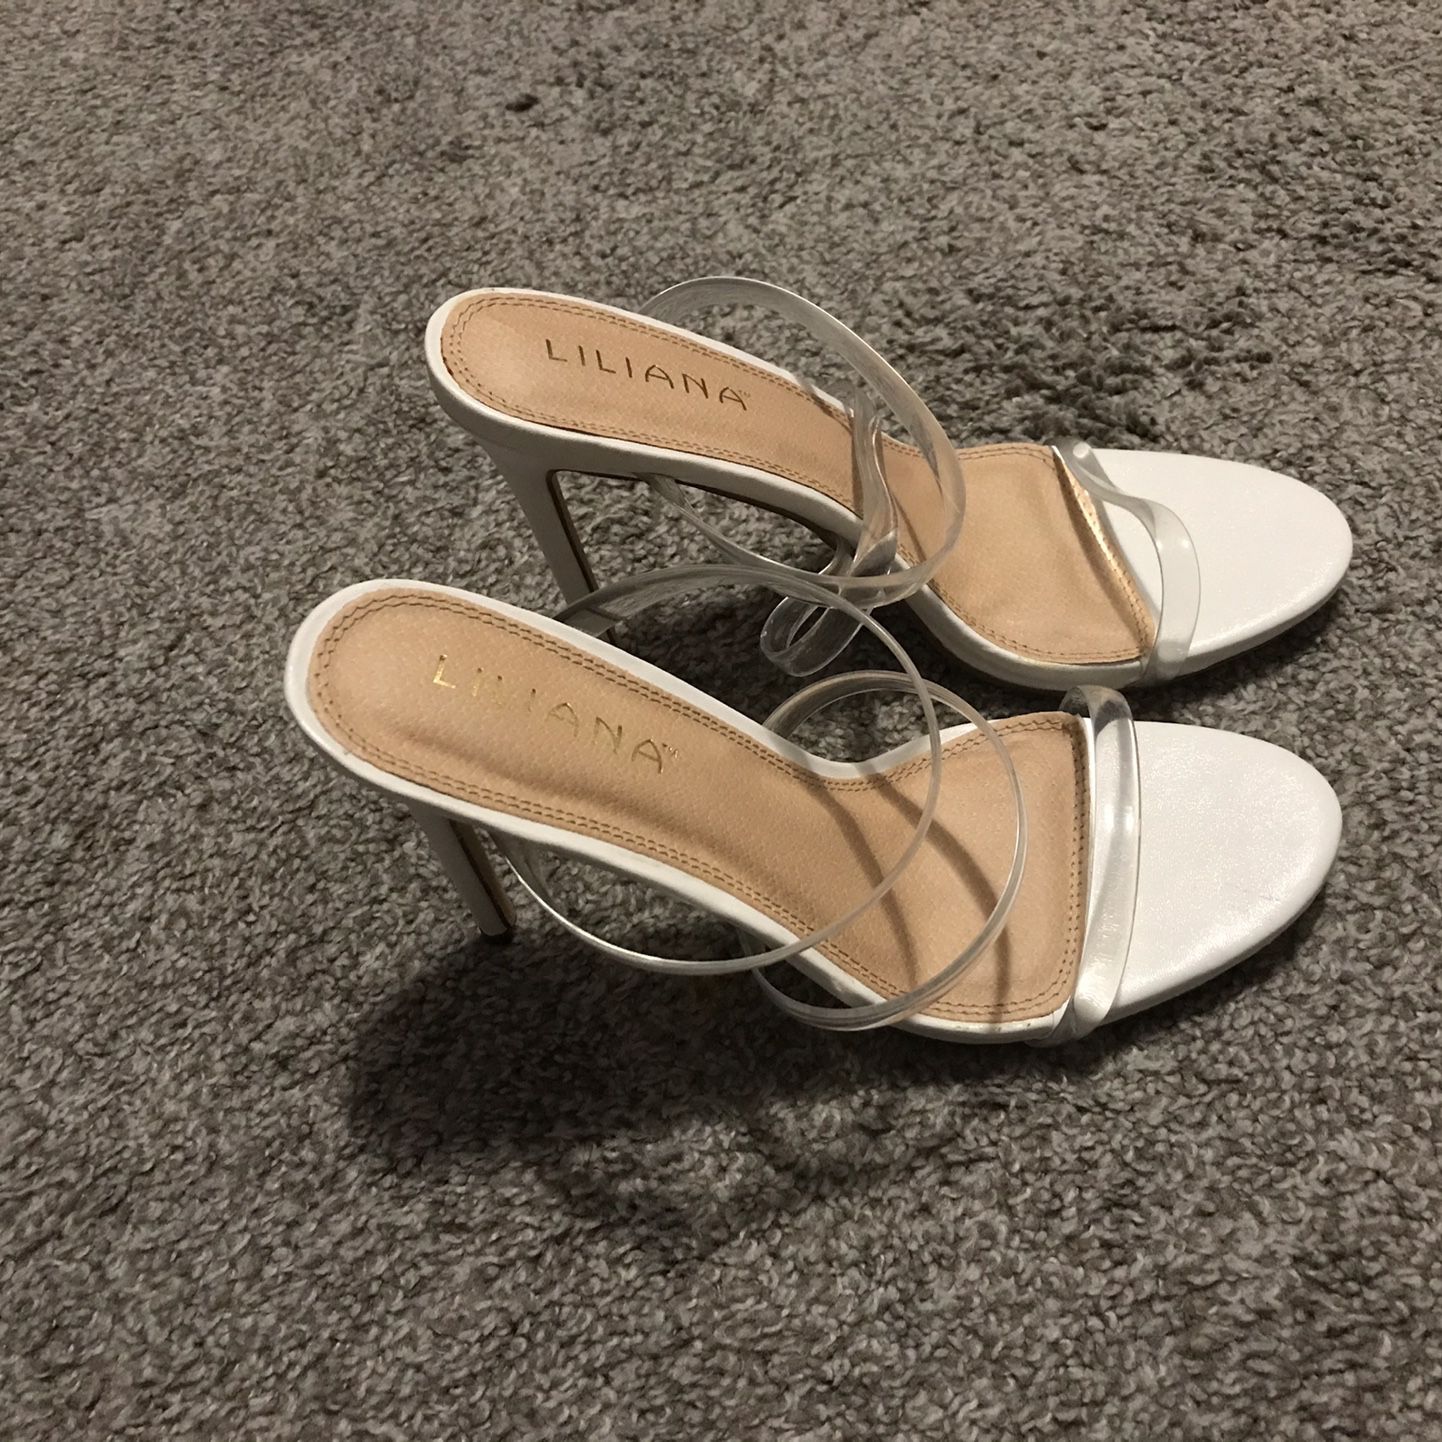 Brand New White Heels With 3 Clear Straps